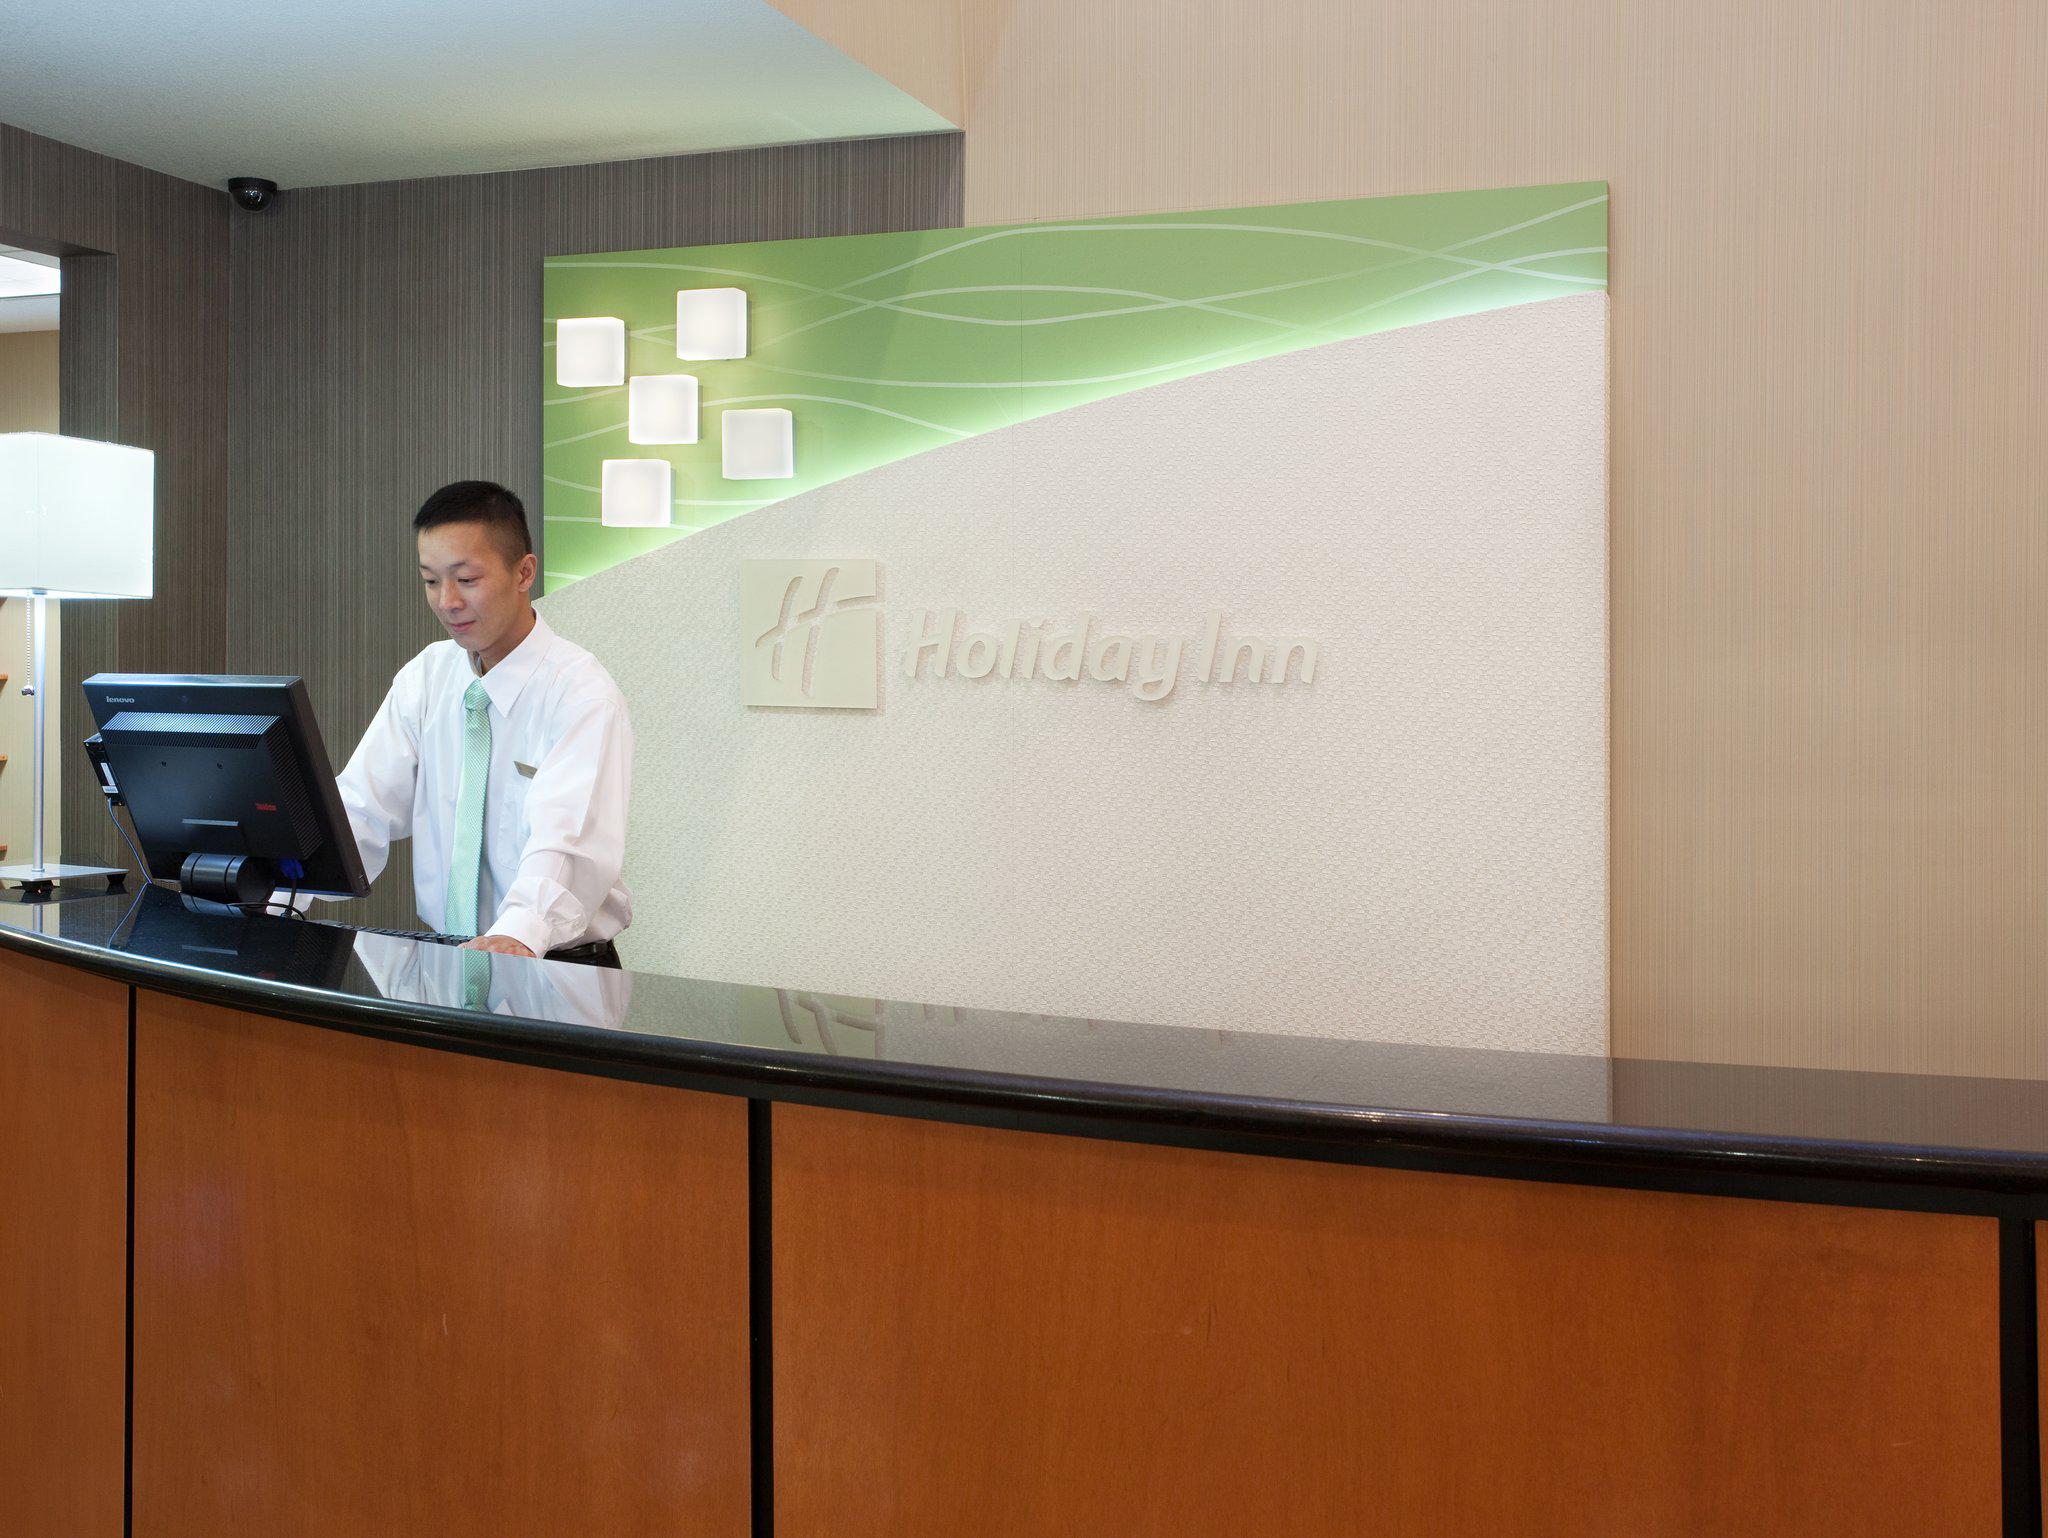 Holiday Inn & Suites Oakland - Airport Photo